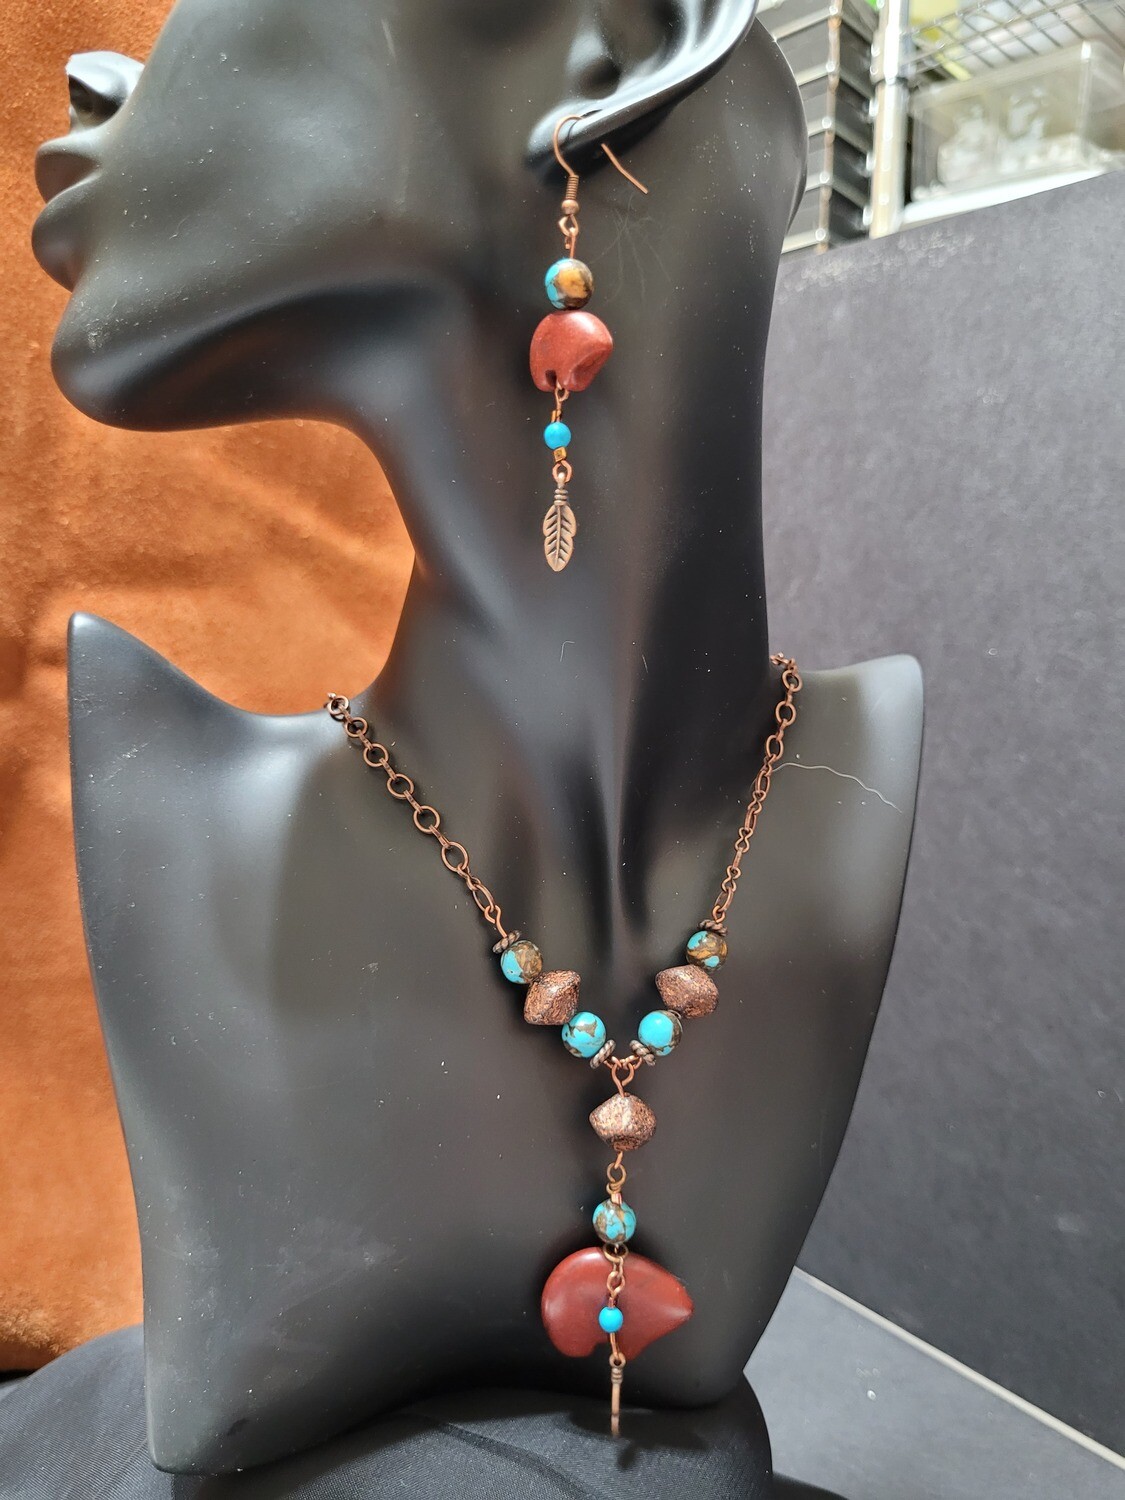 Red Jasper bear necklace and earrings